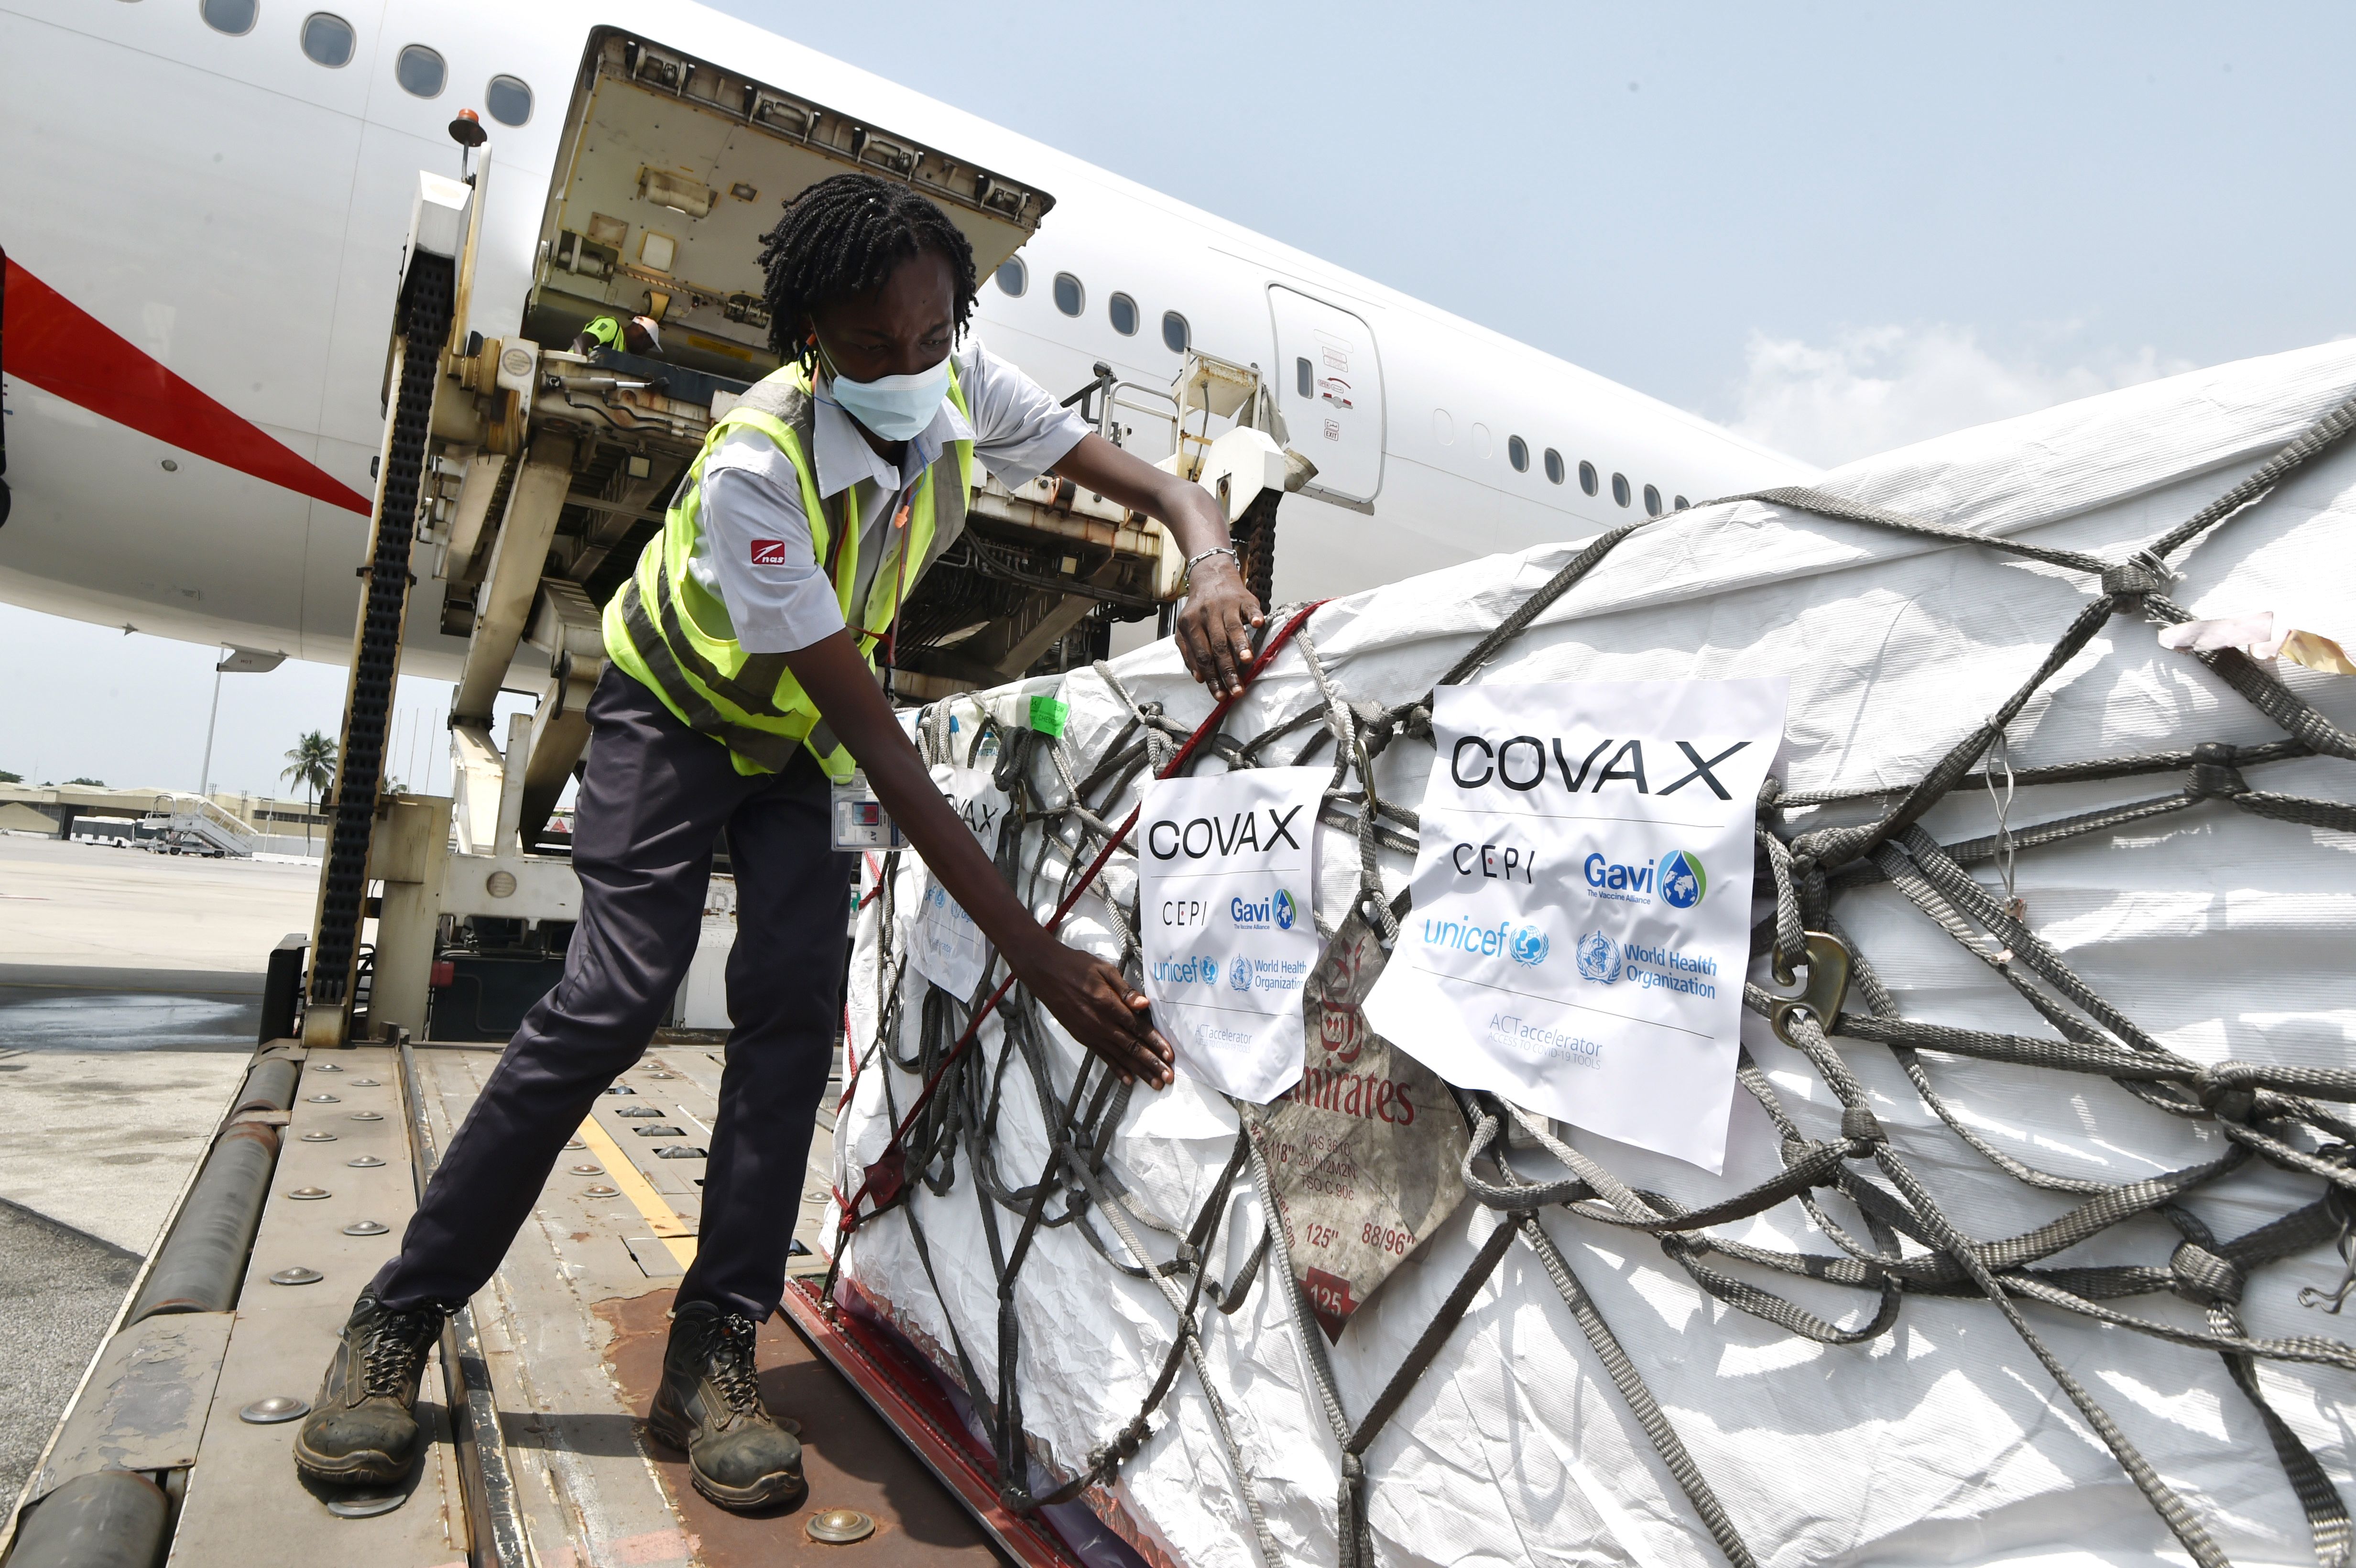 A woman puts Covax stickers as workers unload a shipment of AstraZeneca Covid-19 vaccine from a plane at Felix Houphouet Boigny airport of Abidjan on February 26, 2021. - Ivory Coast has received 504.000 doses of AstraZeneca Covid-19 vaccine on February 26. Covax is a global scheme to procure and distribute inoculations for free, as the world races to contain the pandemic.